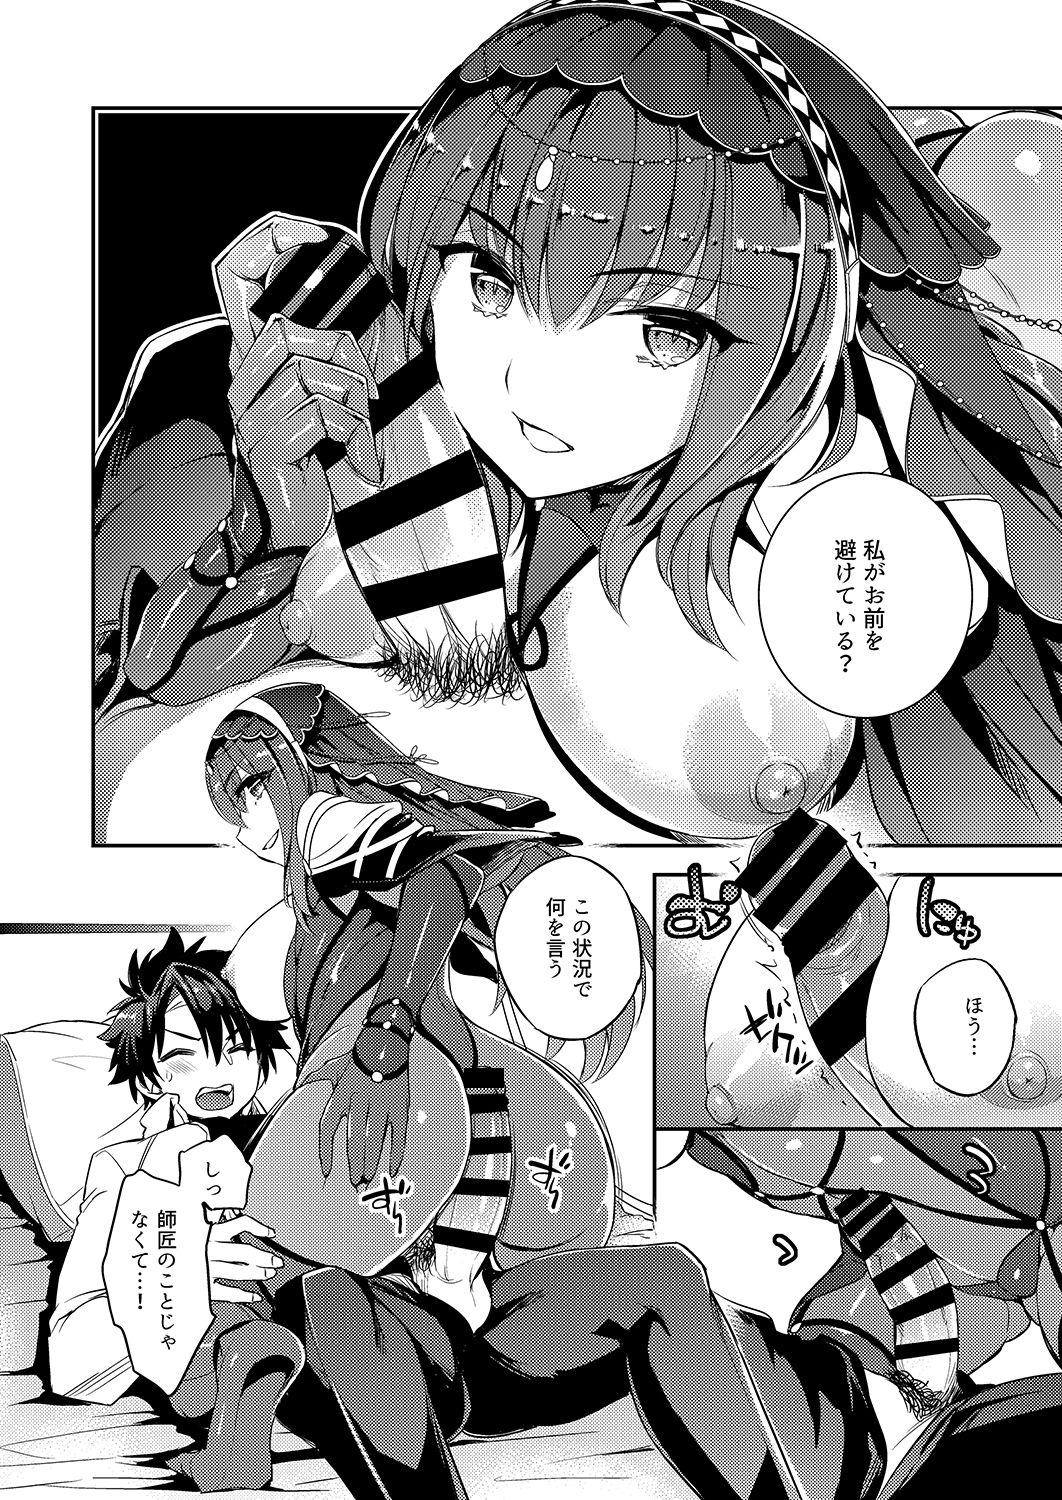 Thylinh C9-39 W Scathach to - Fate grand order Compilation - Page 4